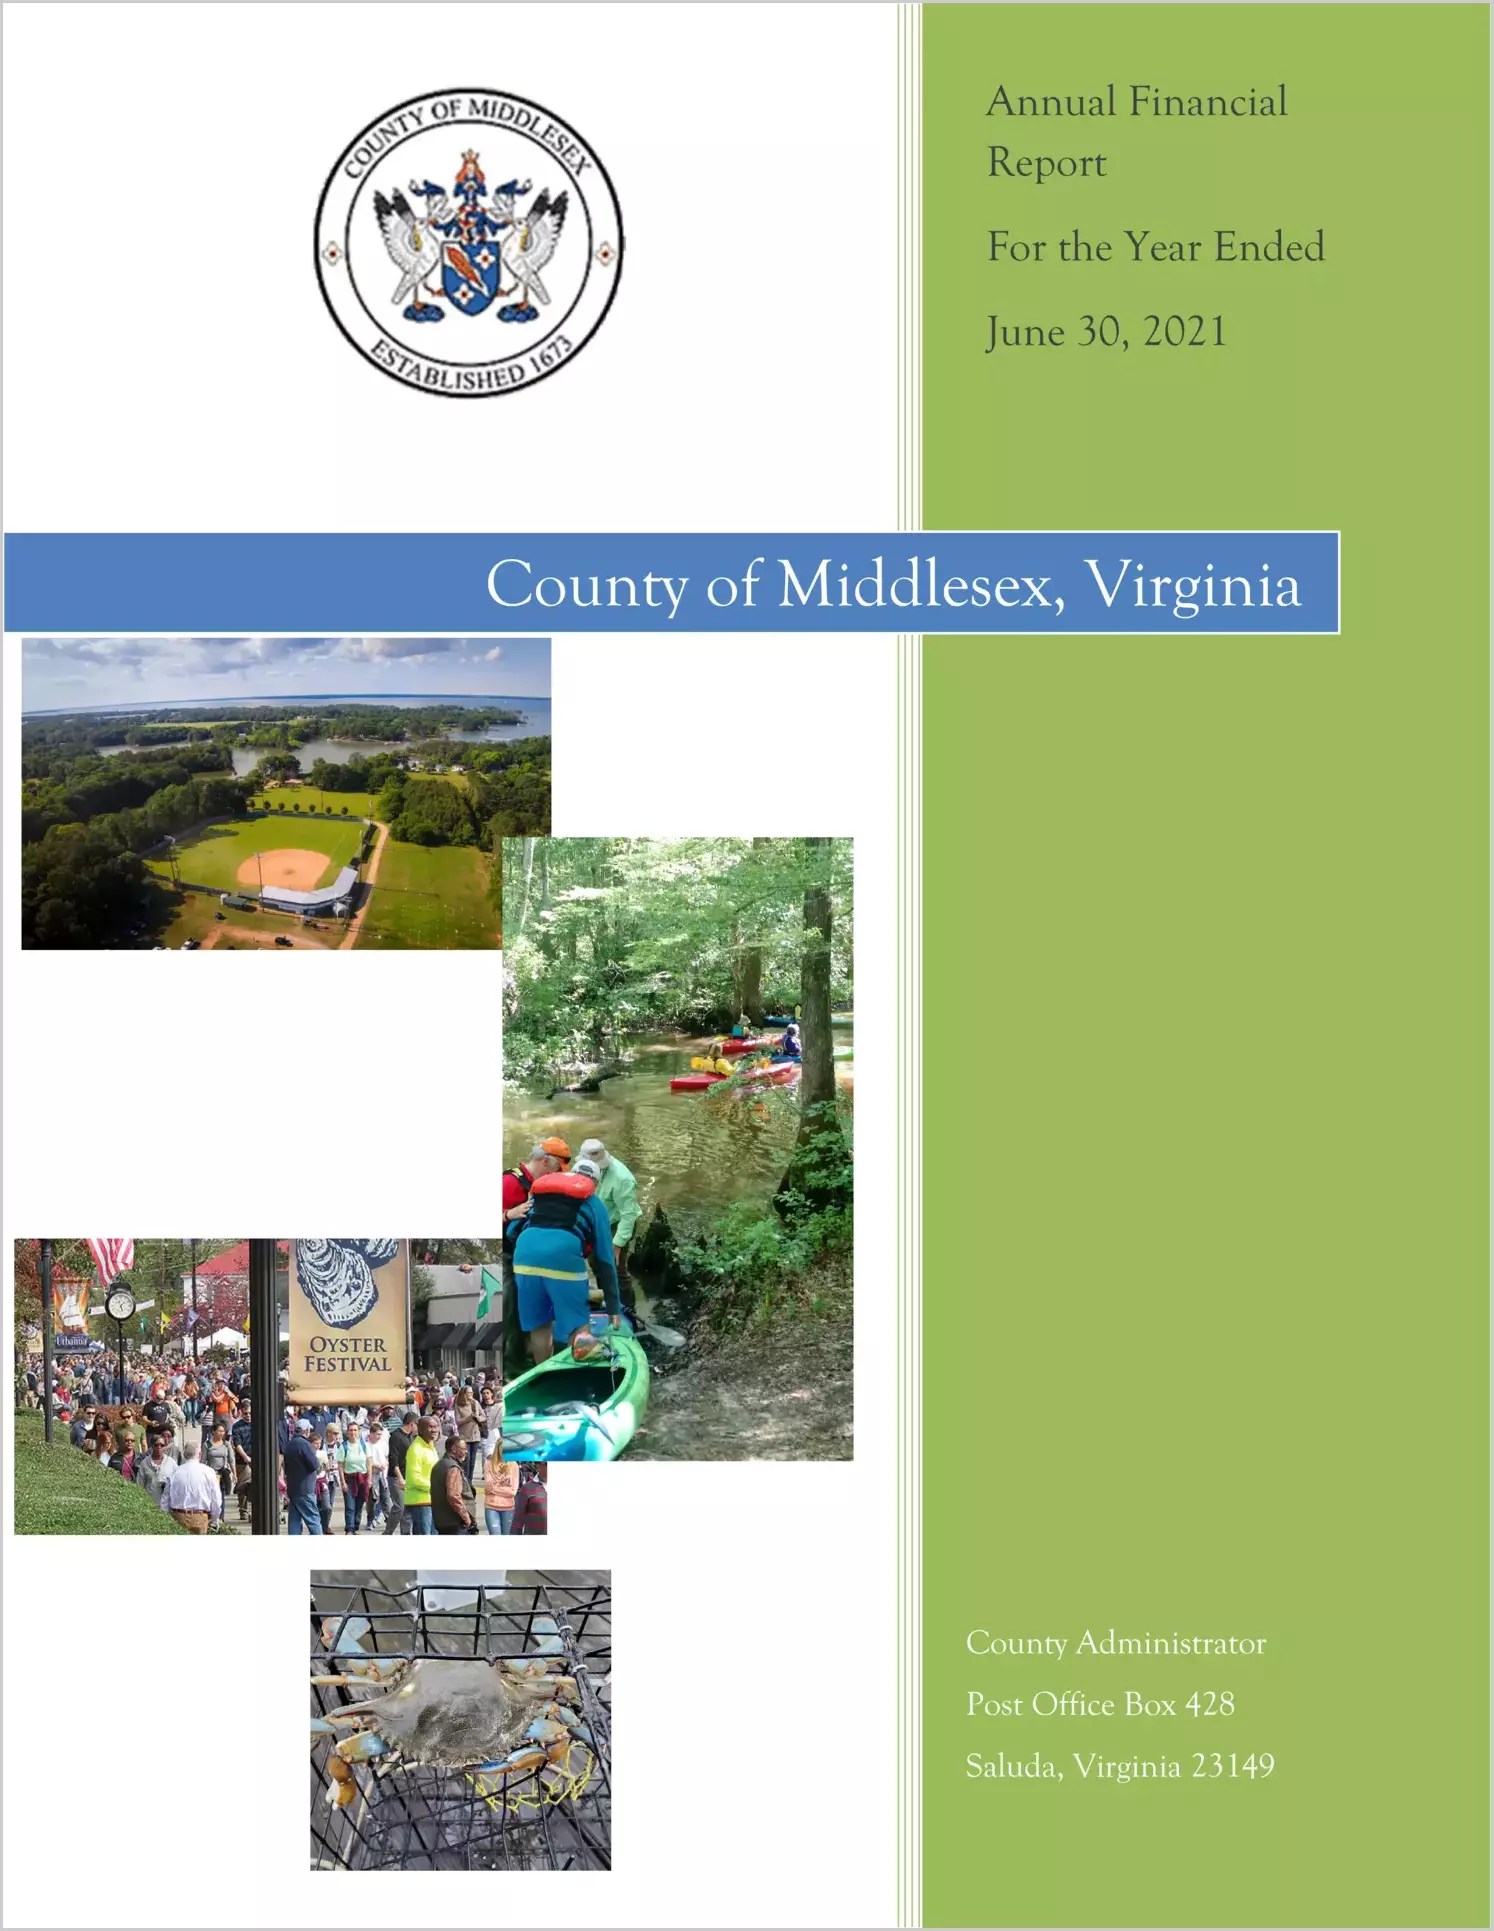 2021 Annual Financial Report for County of Middlesex